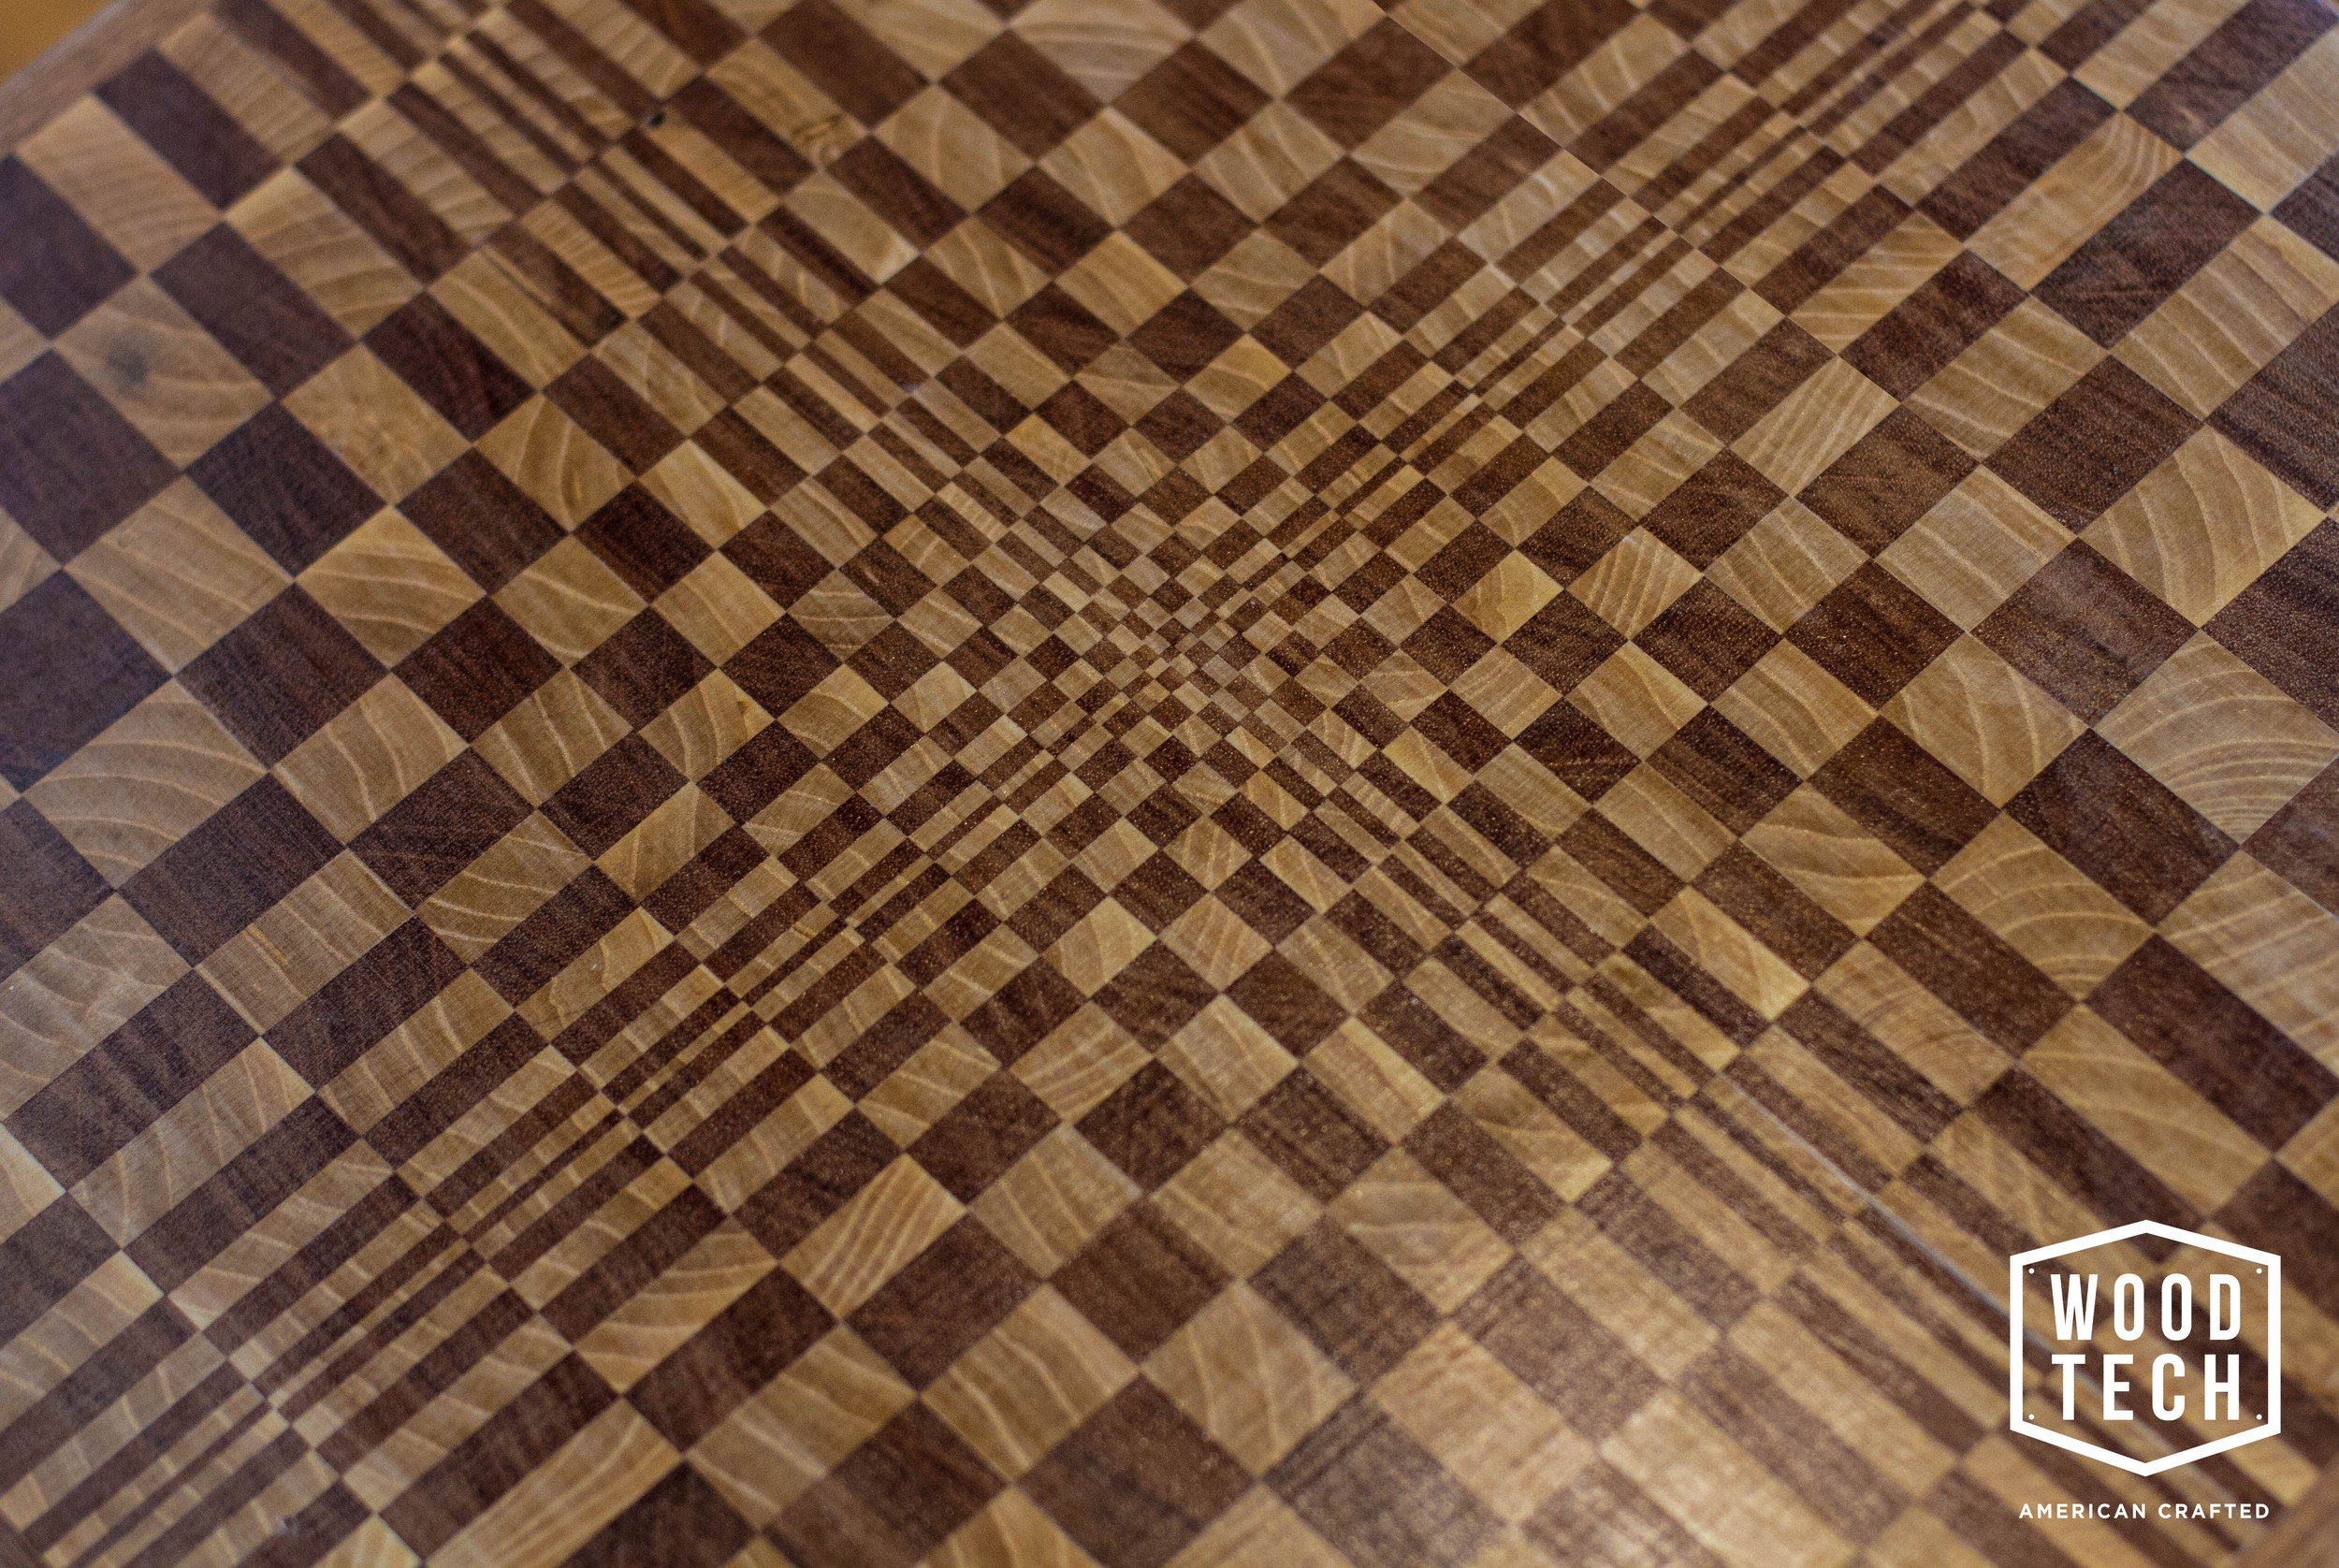 Custom Wood Table with Escher Inspired Design Top View